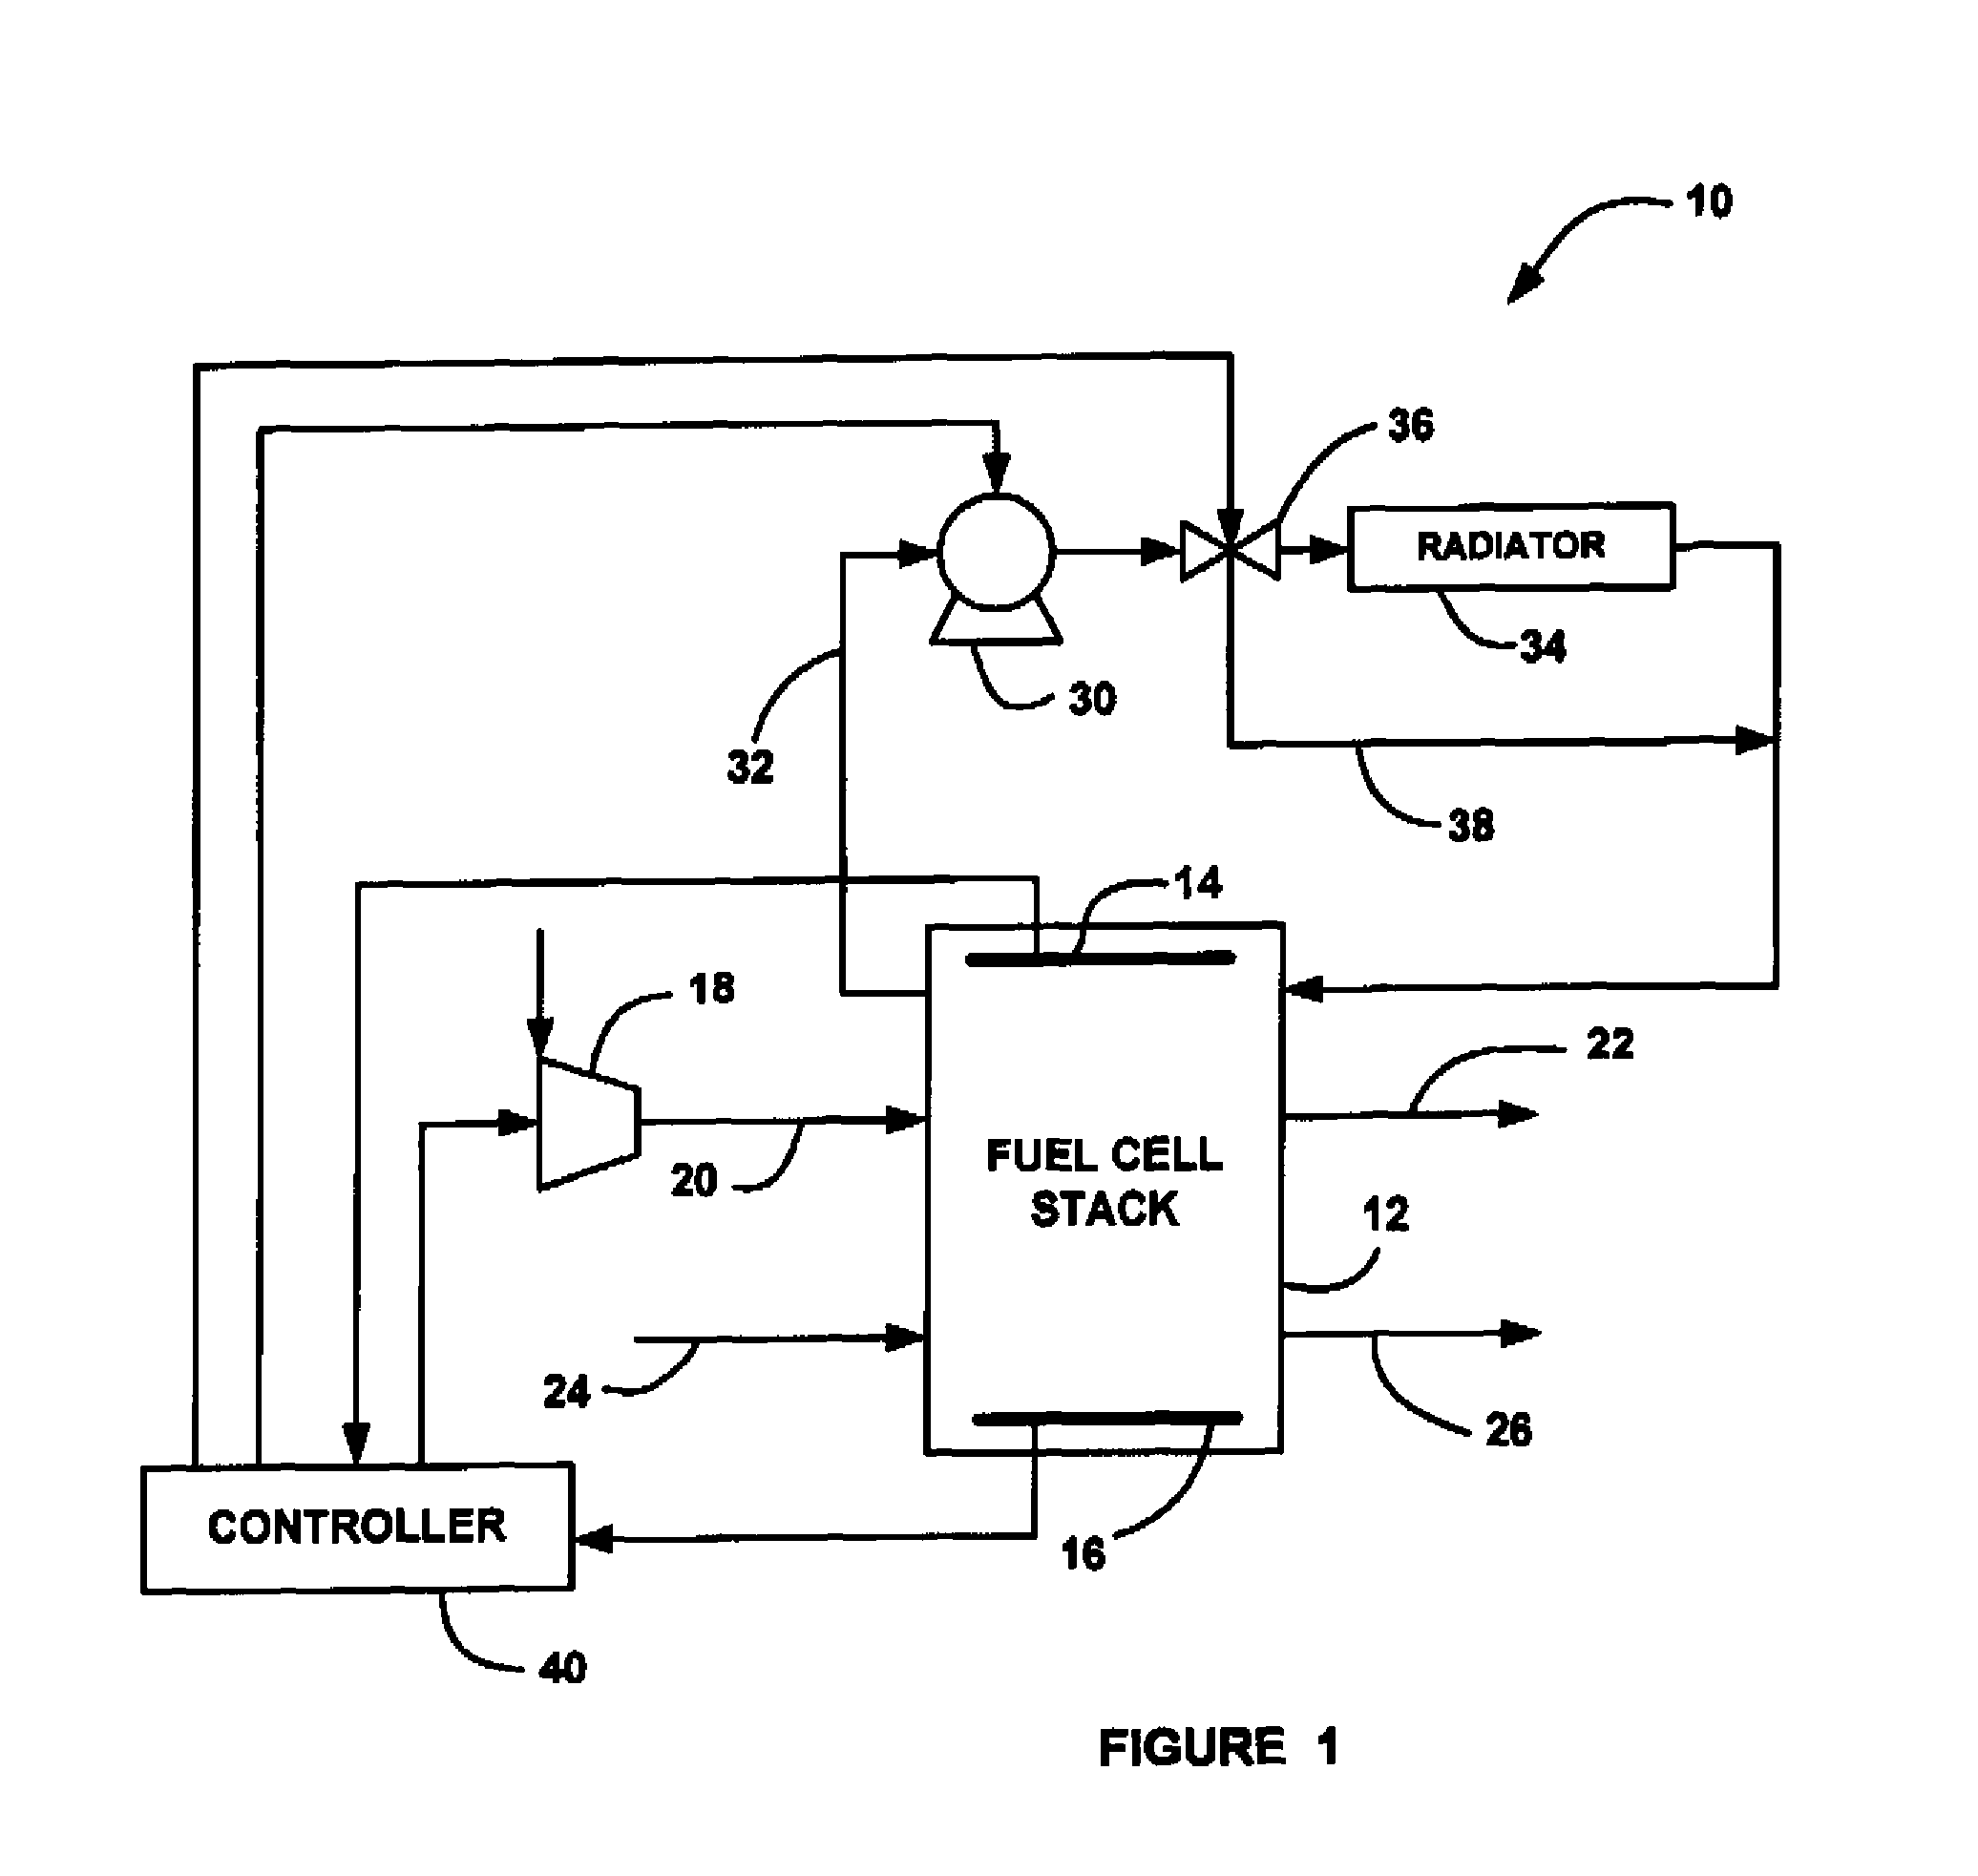 Method for improving FCS reliability after end cell heater failure